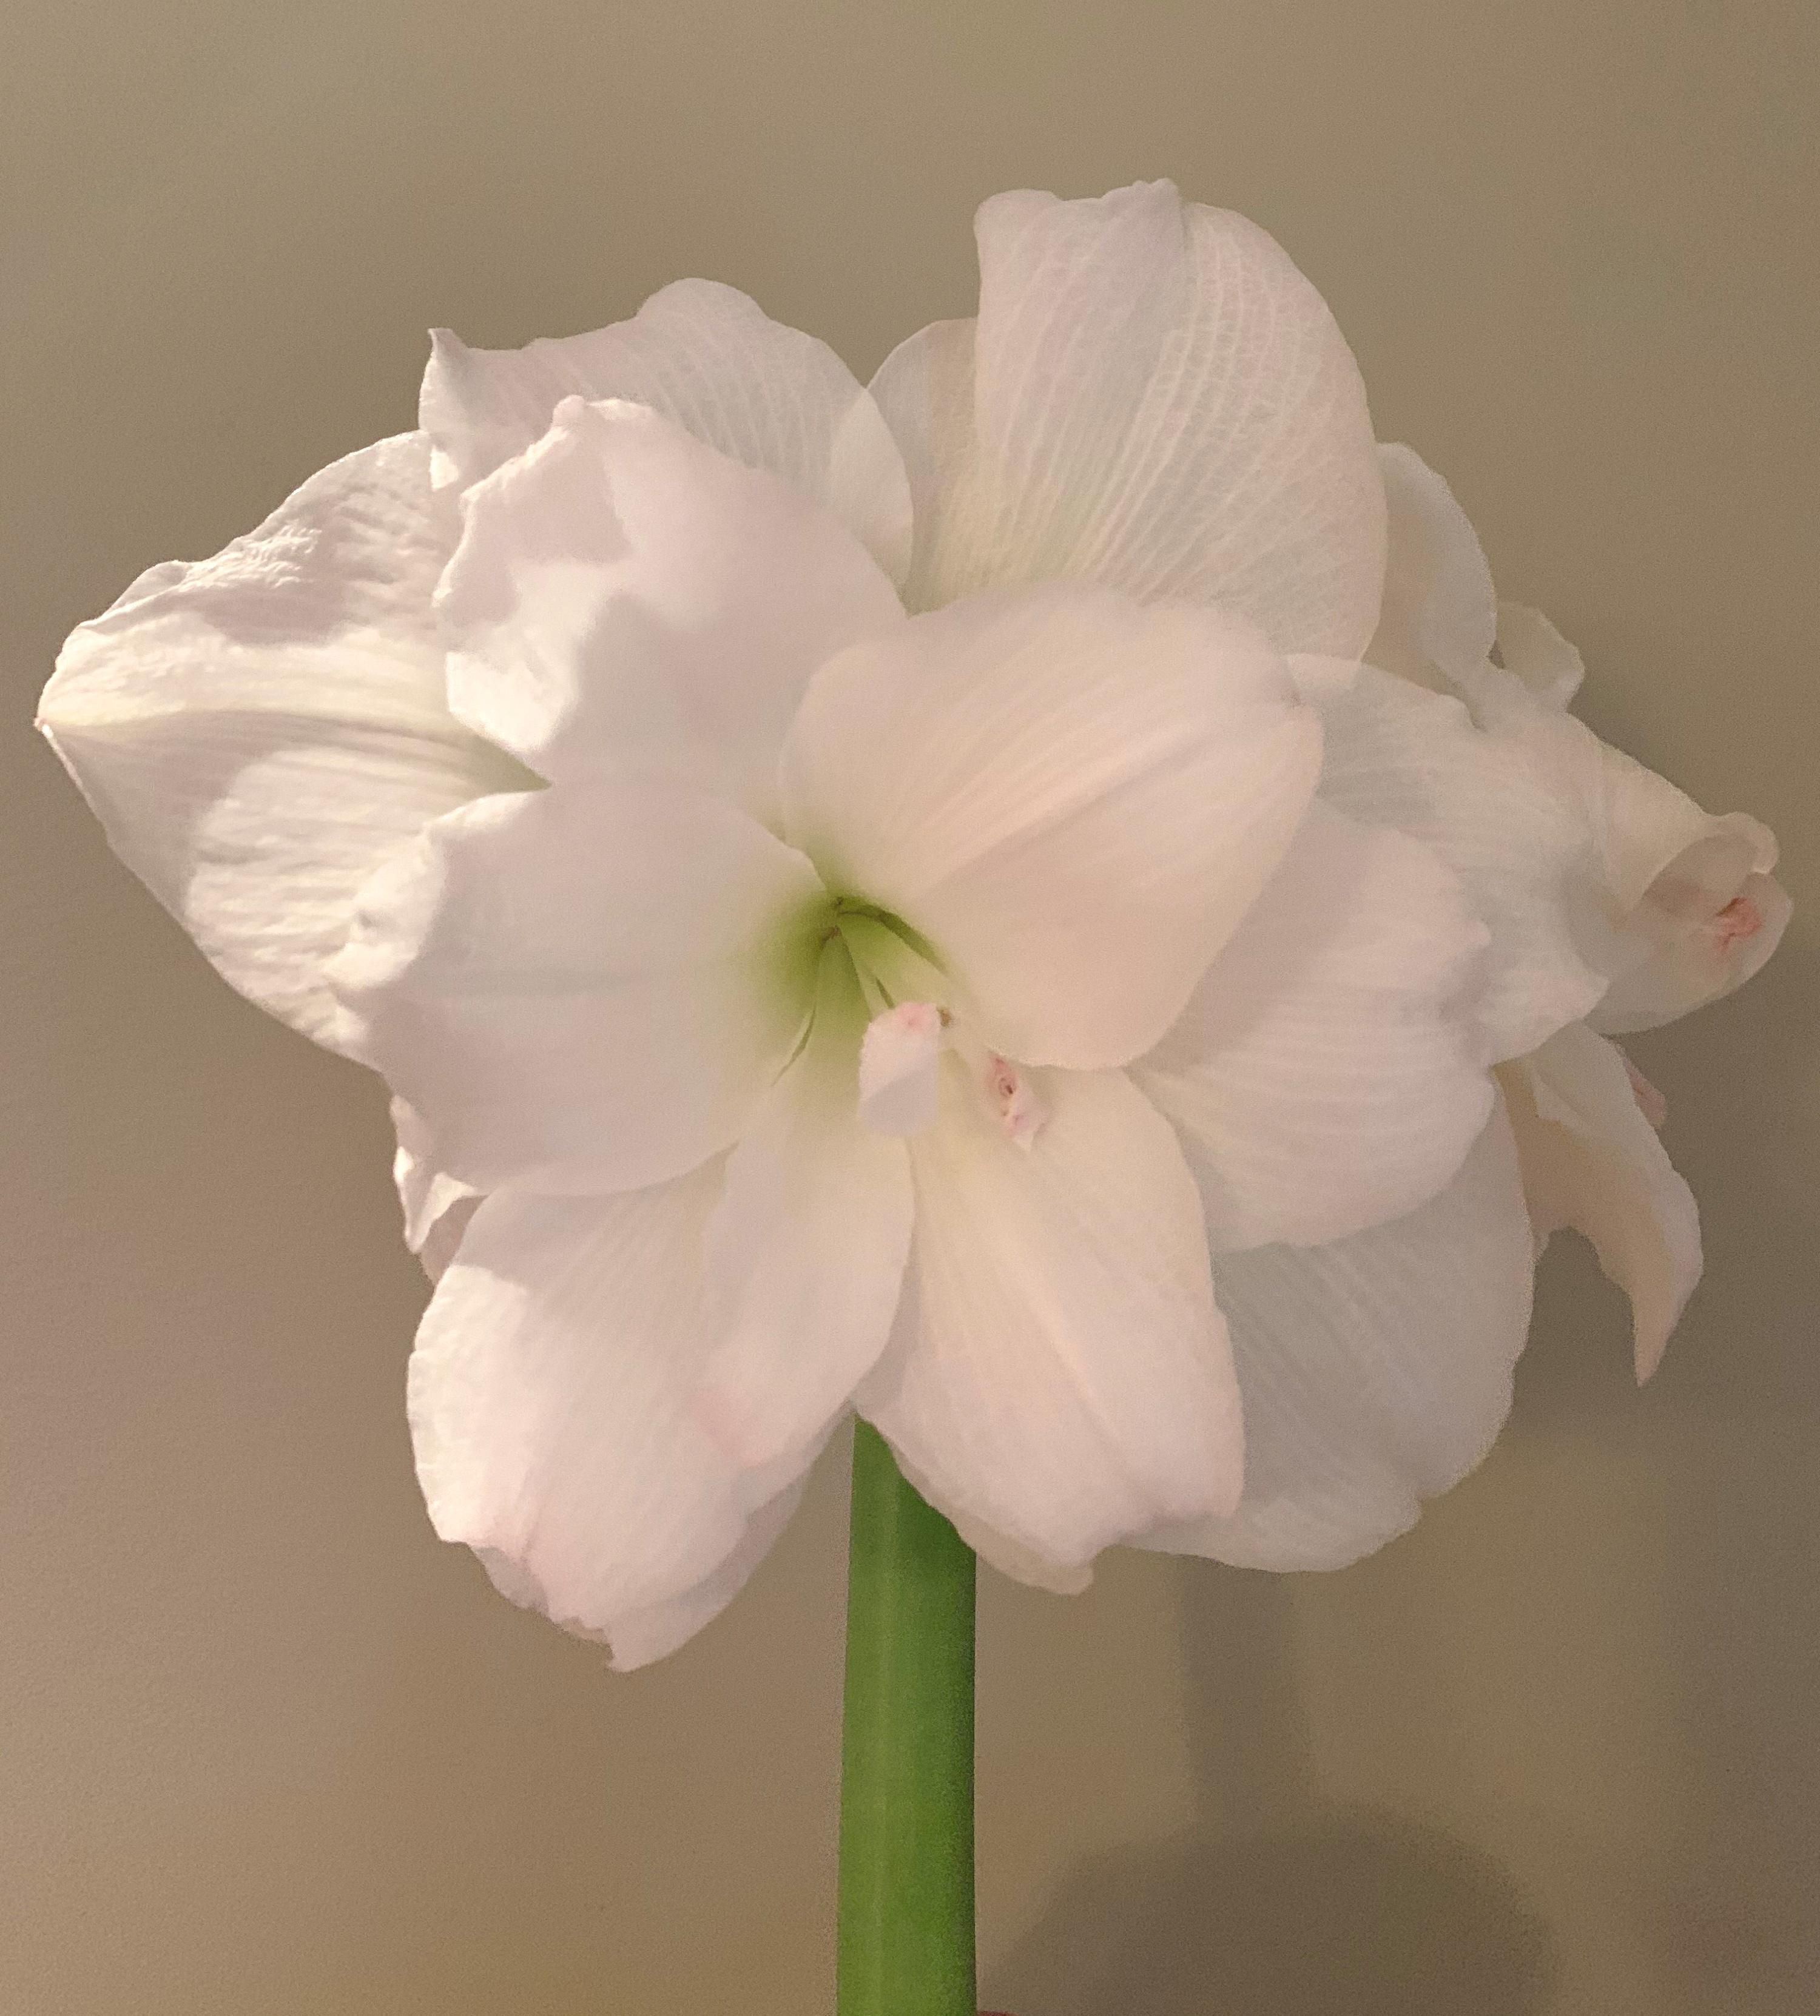 Hippeastrum Southern Hemisphere 'Ice Queen' - Christmas Forcing Amaryllis from Leo Berbee Bulb Company